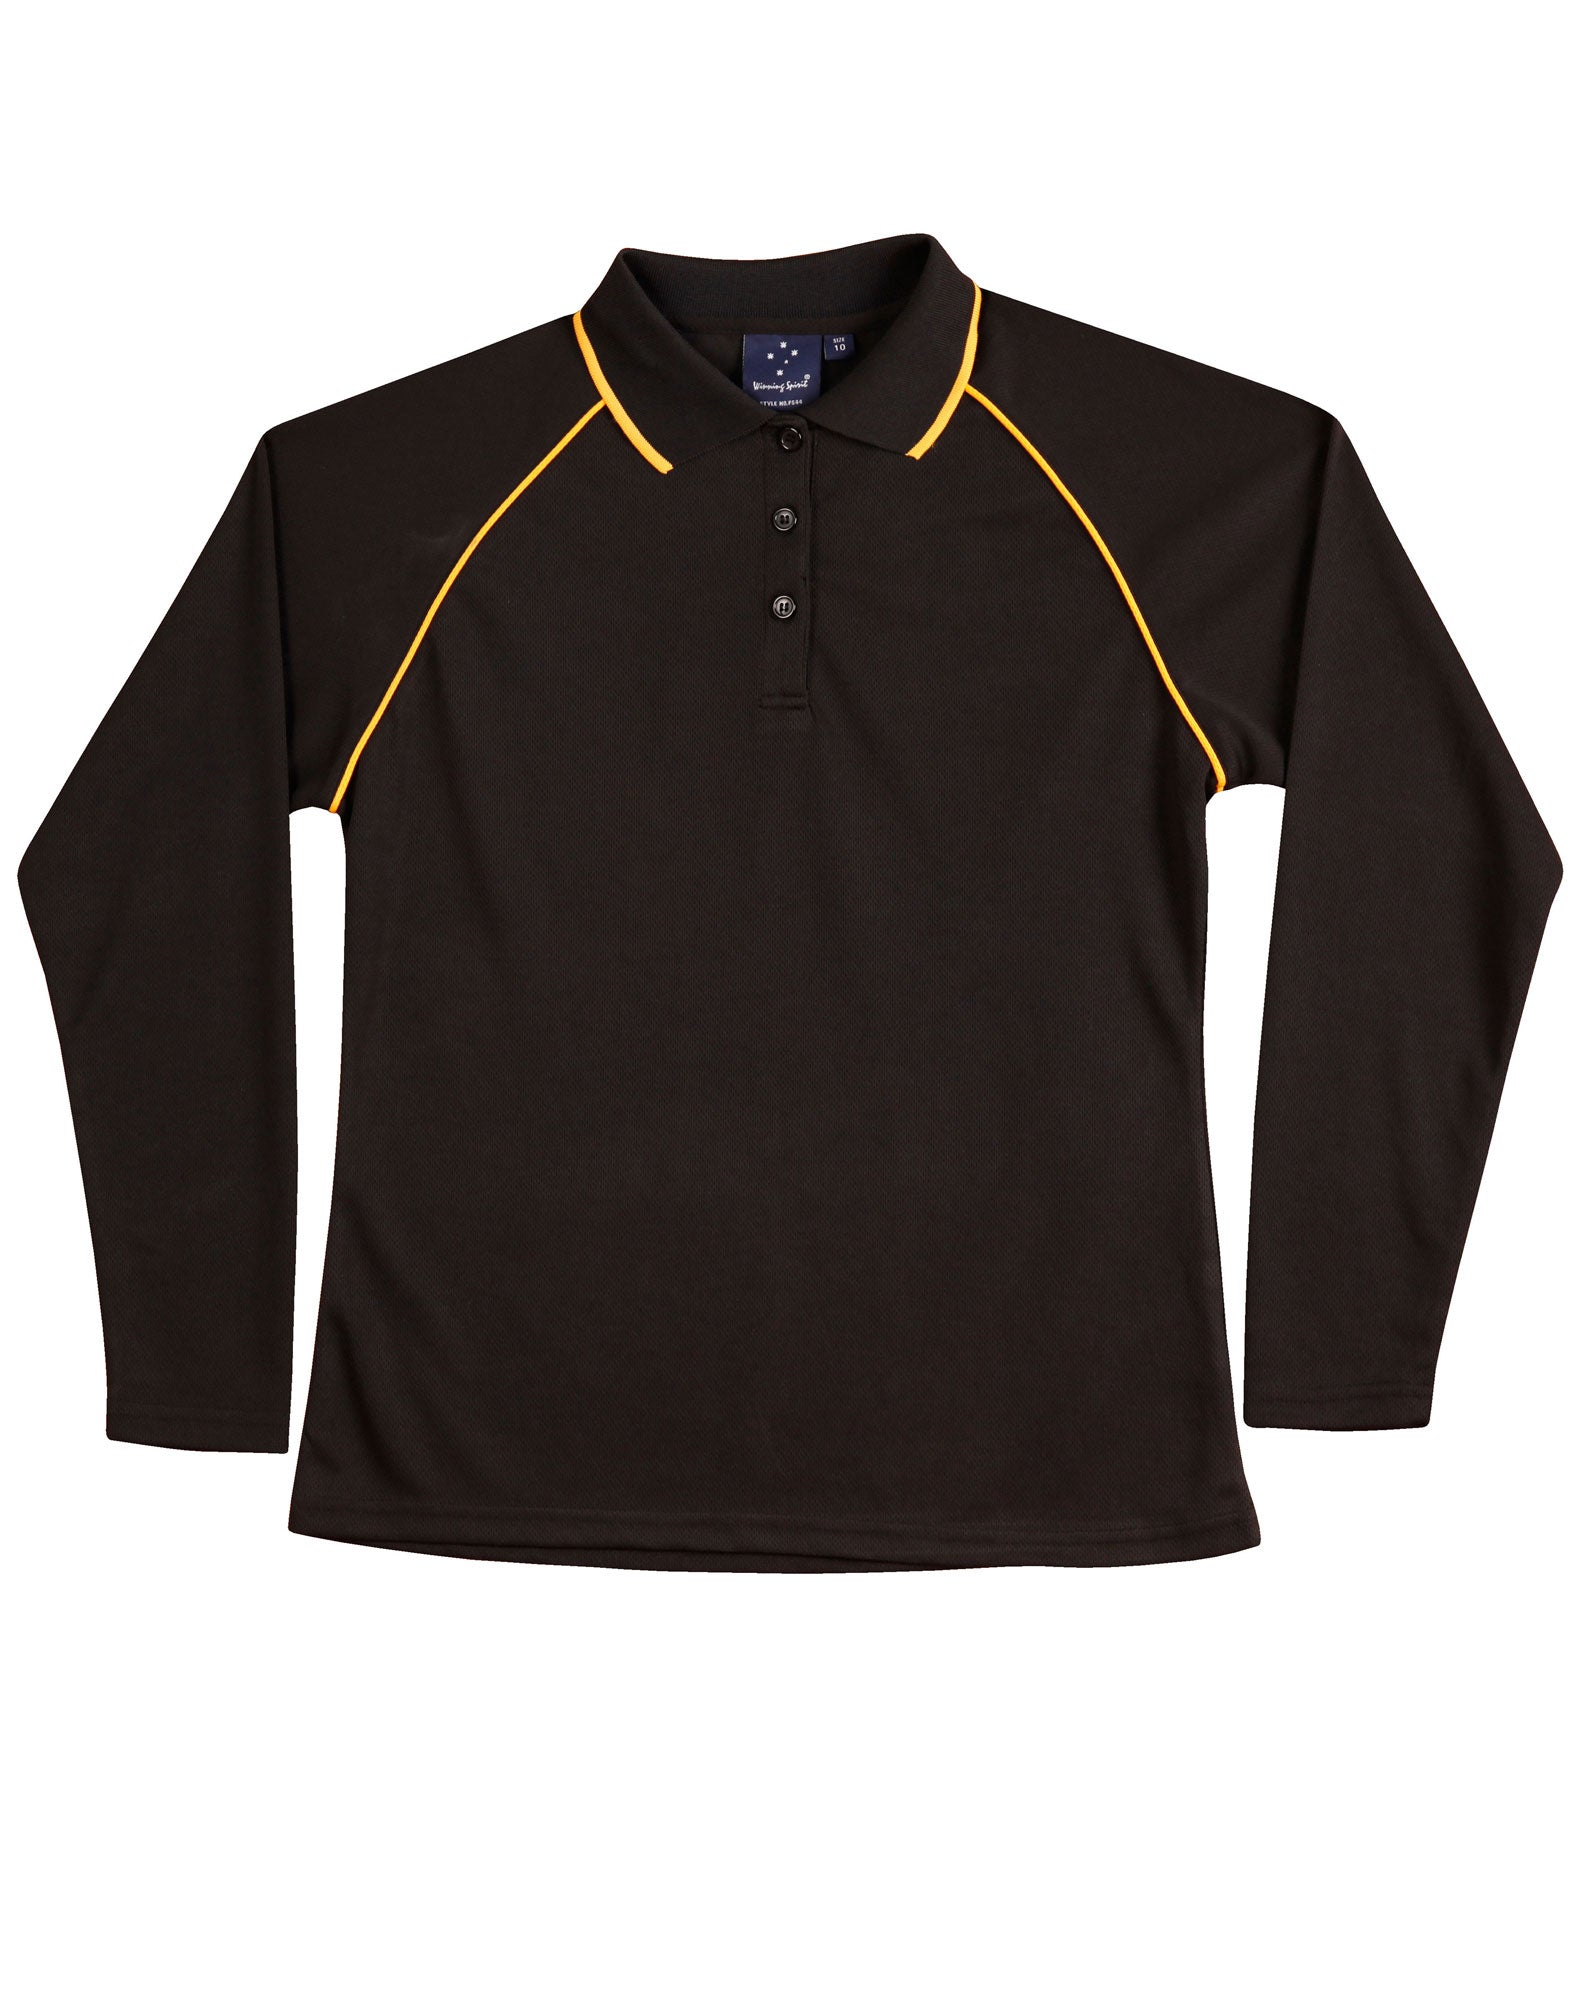 Ladies Long Sleeve Polo Shirt - made by AIW